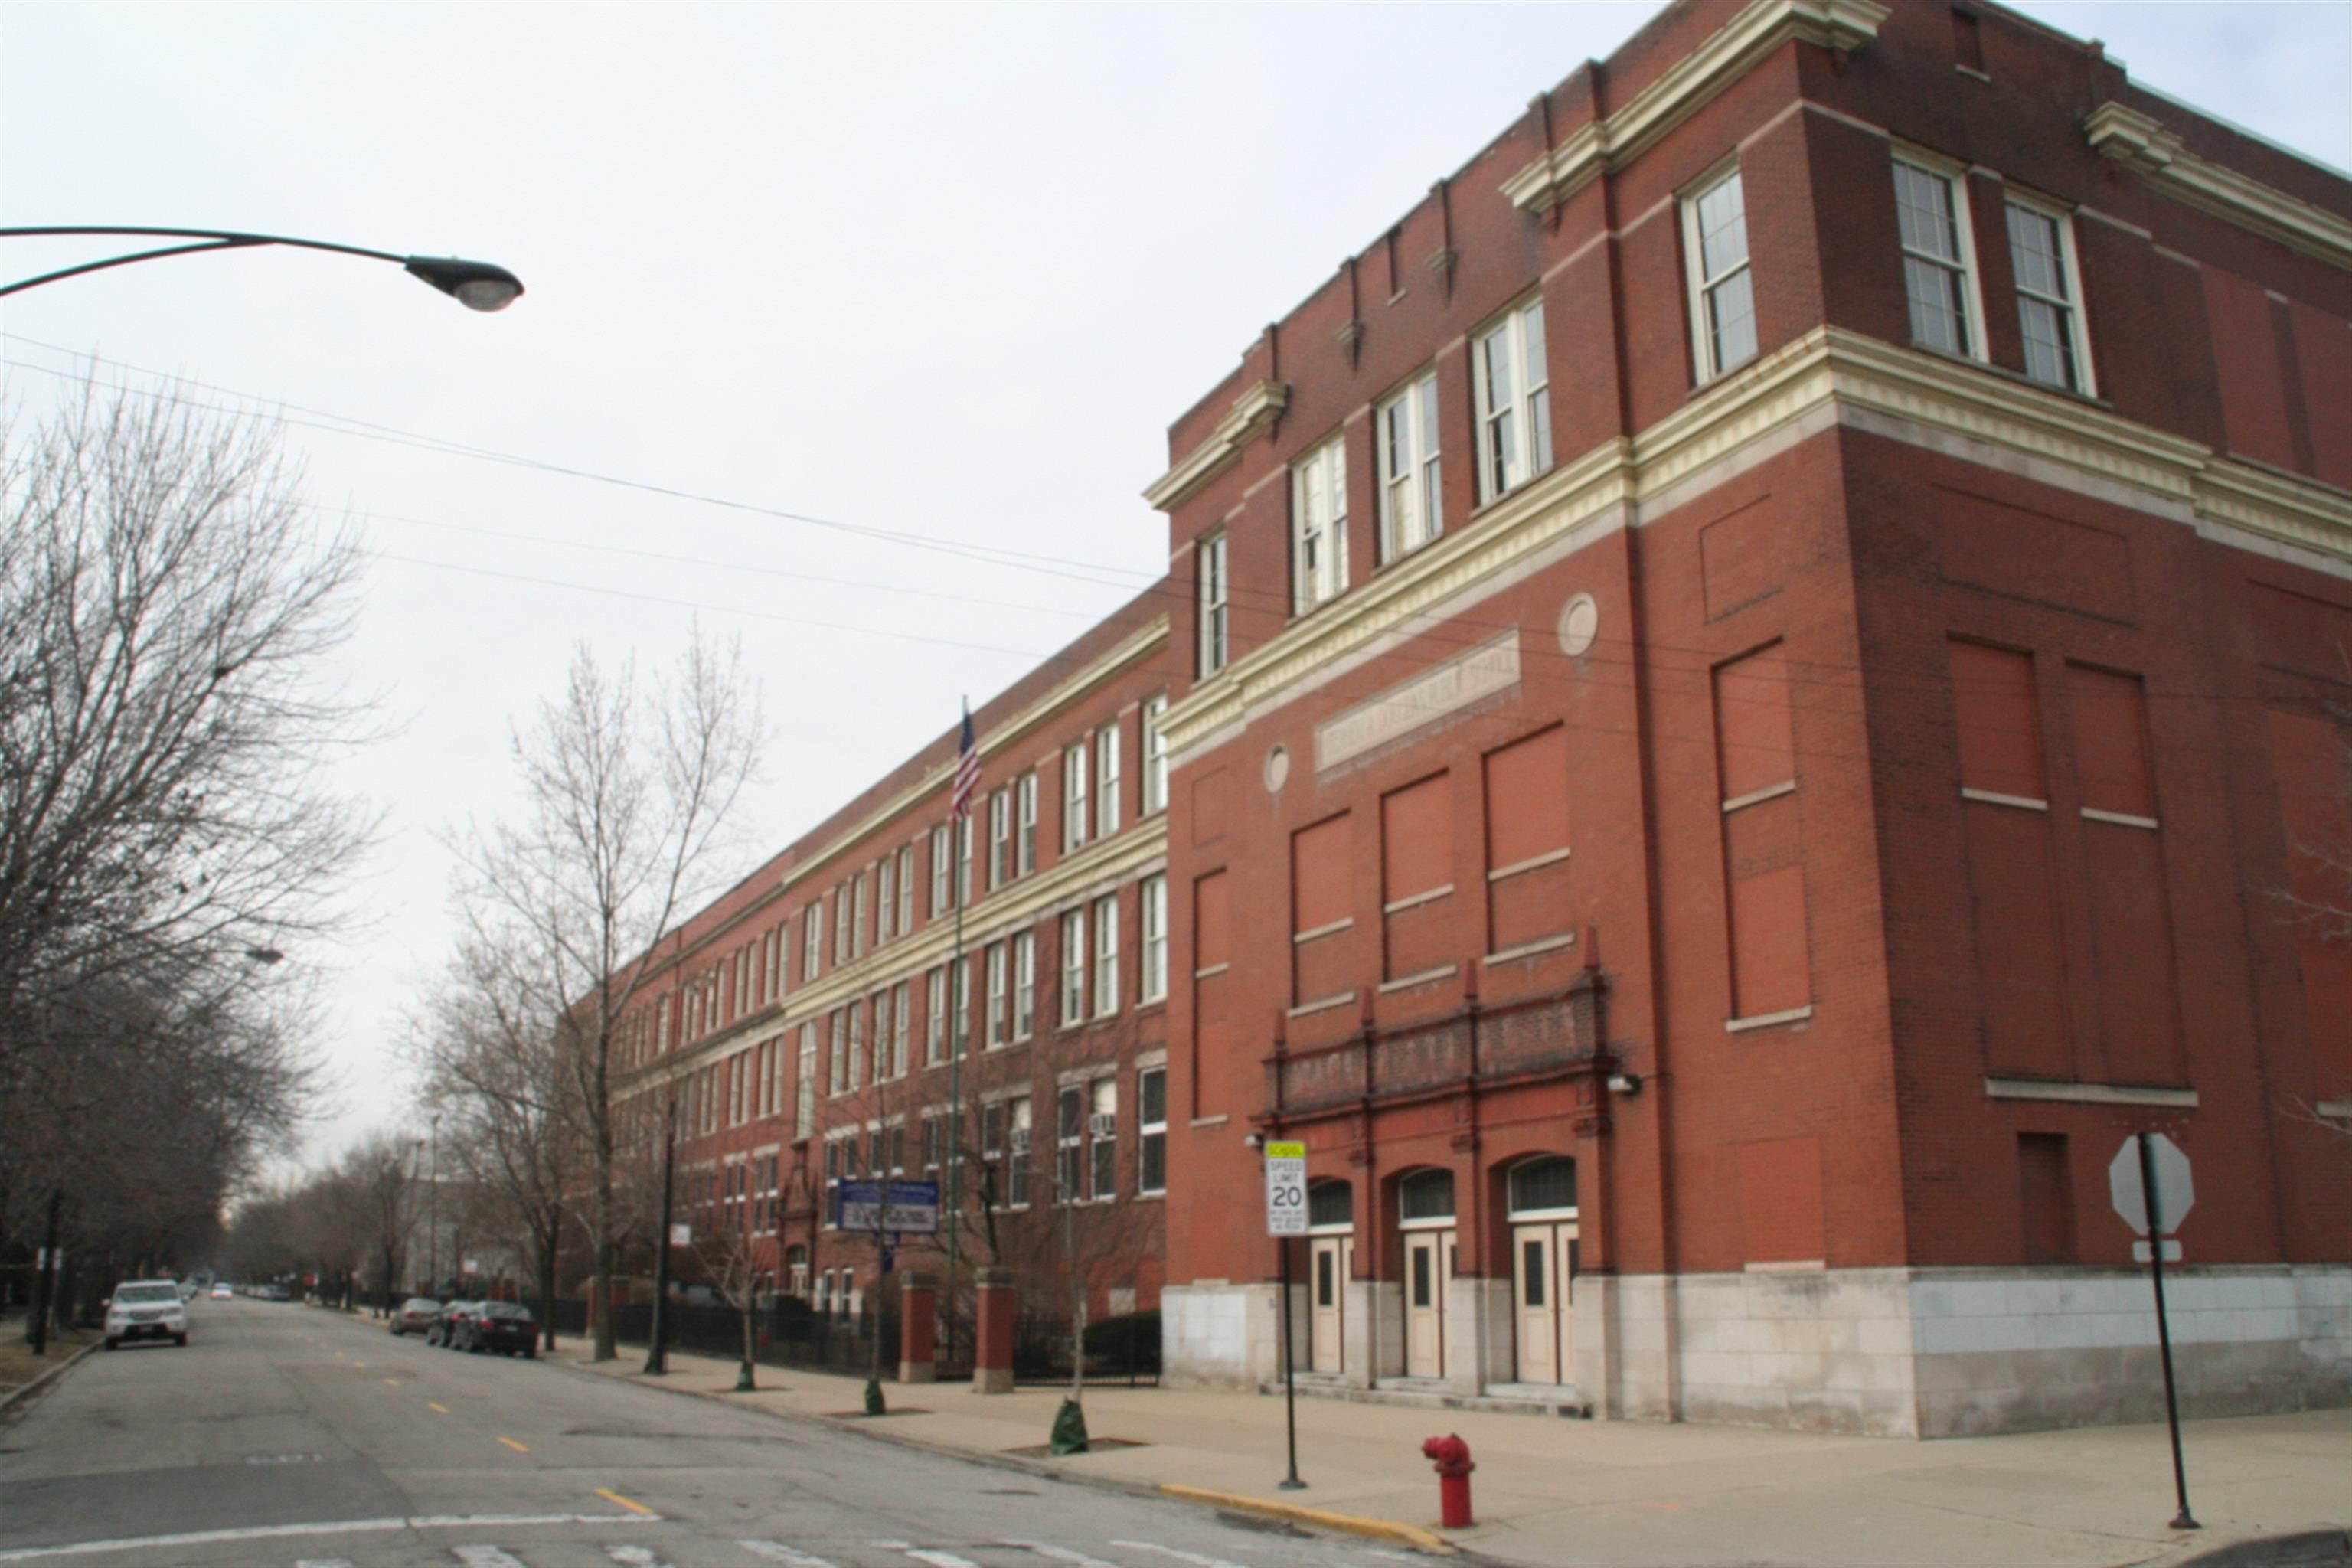 featured image Pershing West Middle School